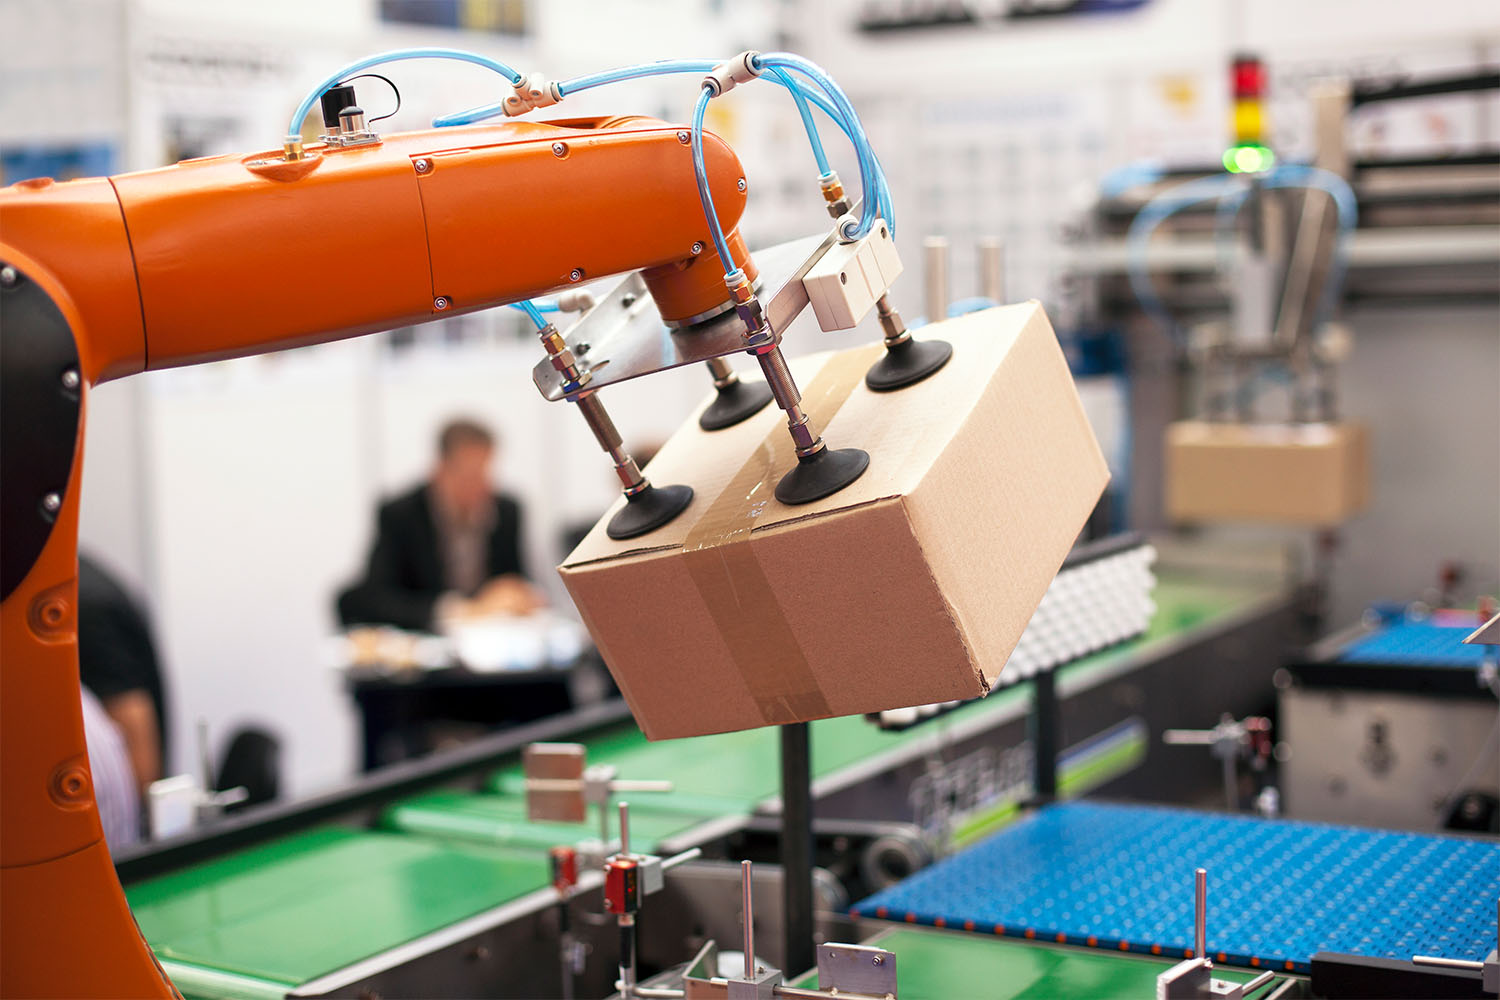 Assembly robot picking up a package